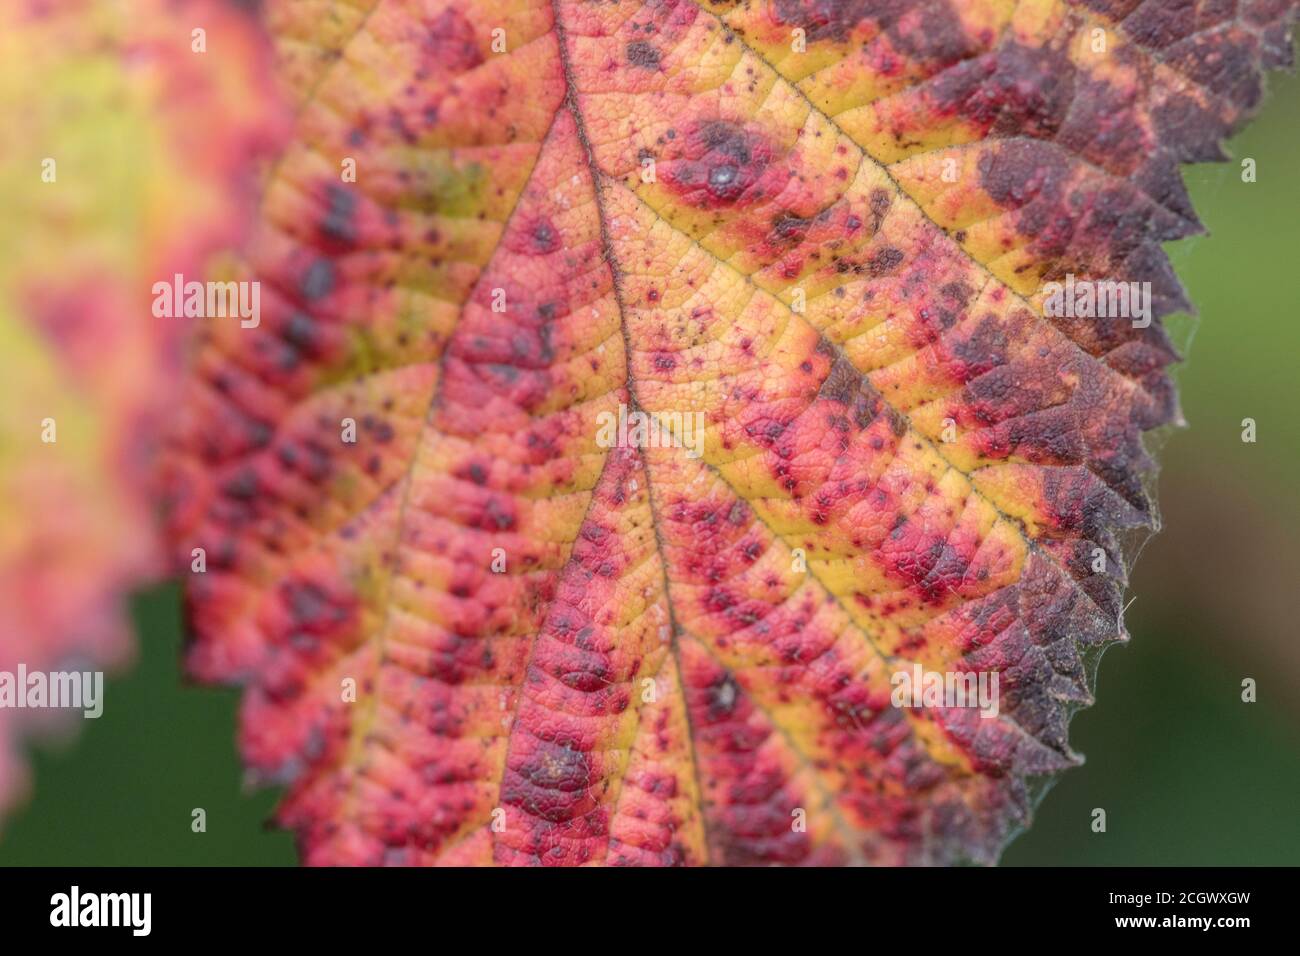 Close-up of a vividly coloured Bramble leaf with what is probably violet bramble rust caused by the fungus Phragmidium violaceum. Plant disease. Stock Photo